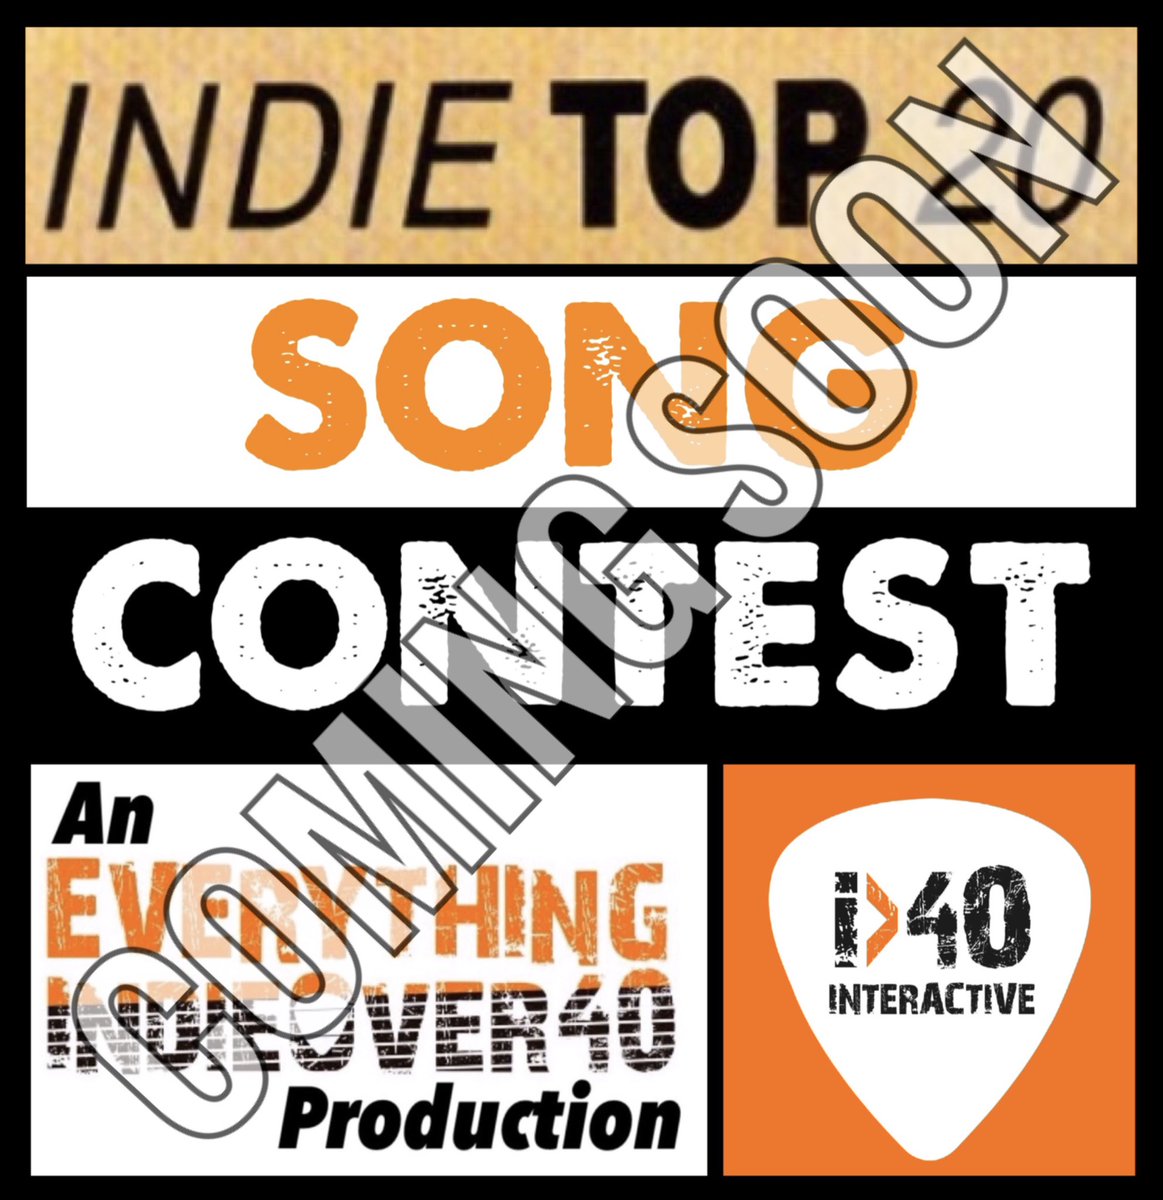 We’re going to reveal as much as we can about the our Indie Top 20 Song Contest interactive feature, barring distractionsWe’ll keep adding to this tweet as and when to generate a thread There may be long gaps and it could overrun into next few days  #i40indietop20